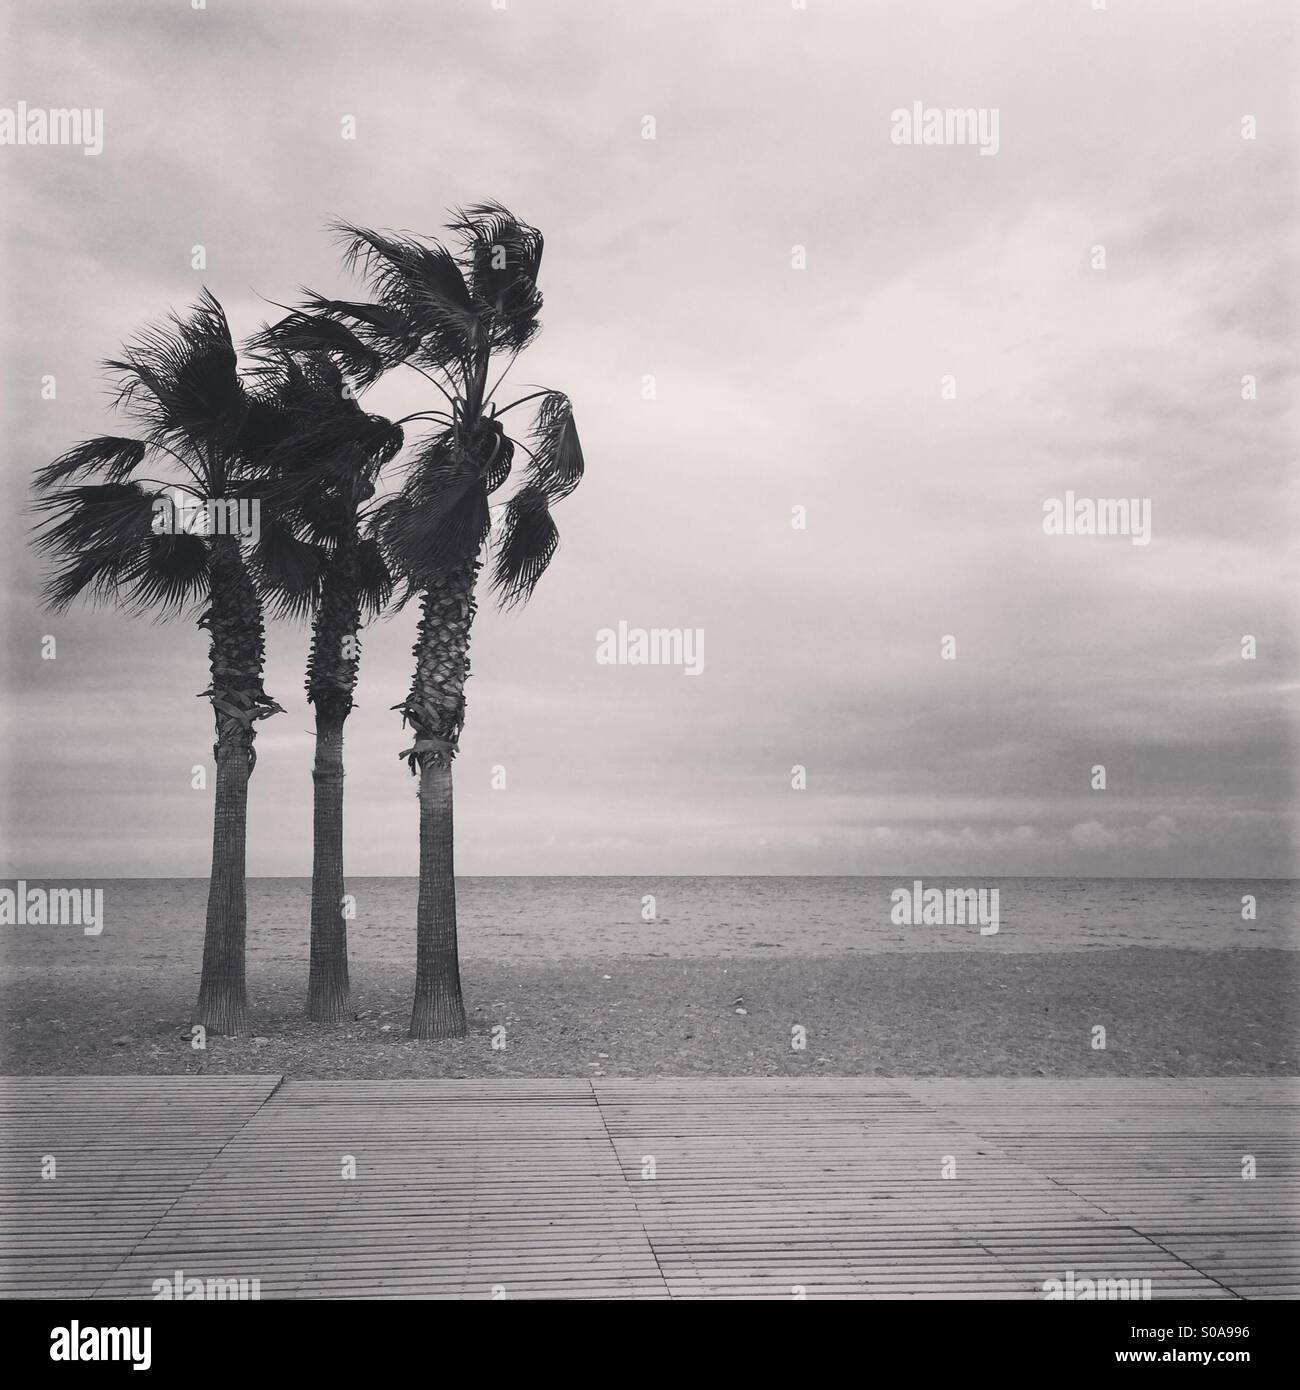 Wind blowing at the beach, moving three palmtrees Stock Photo